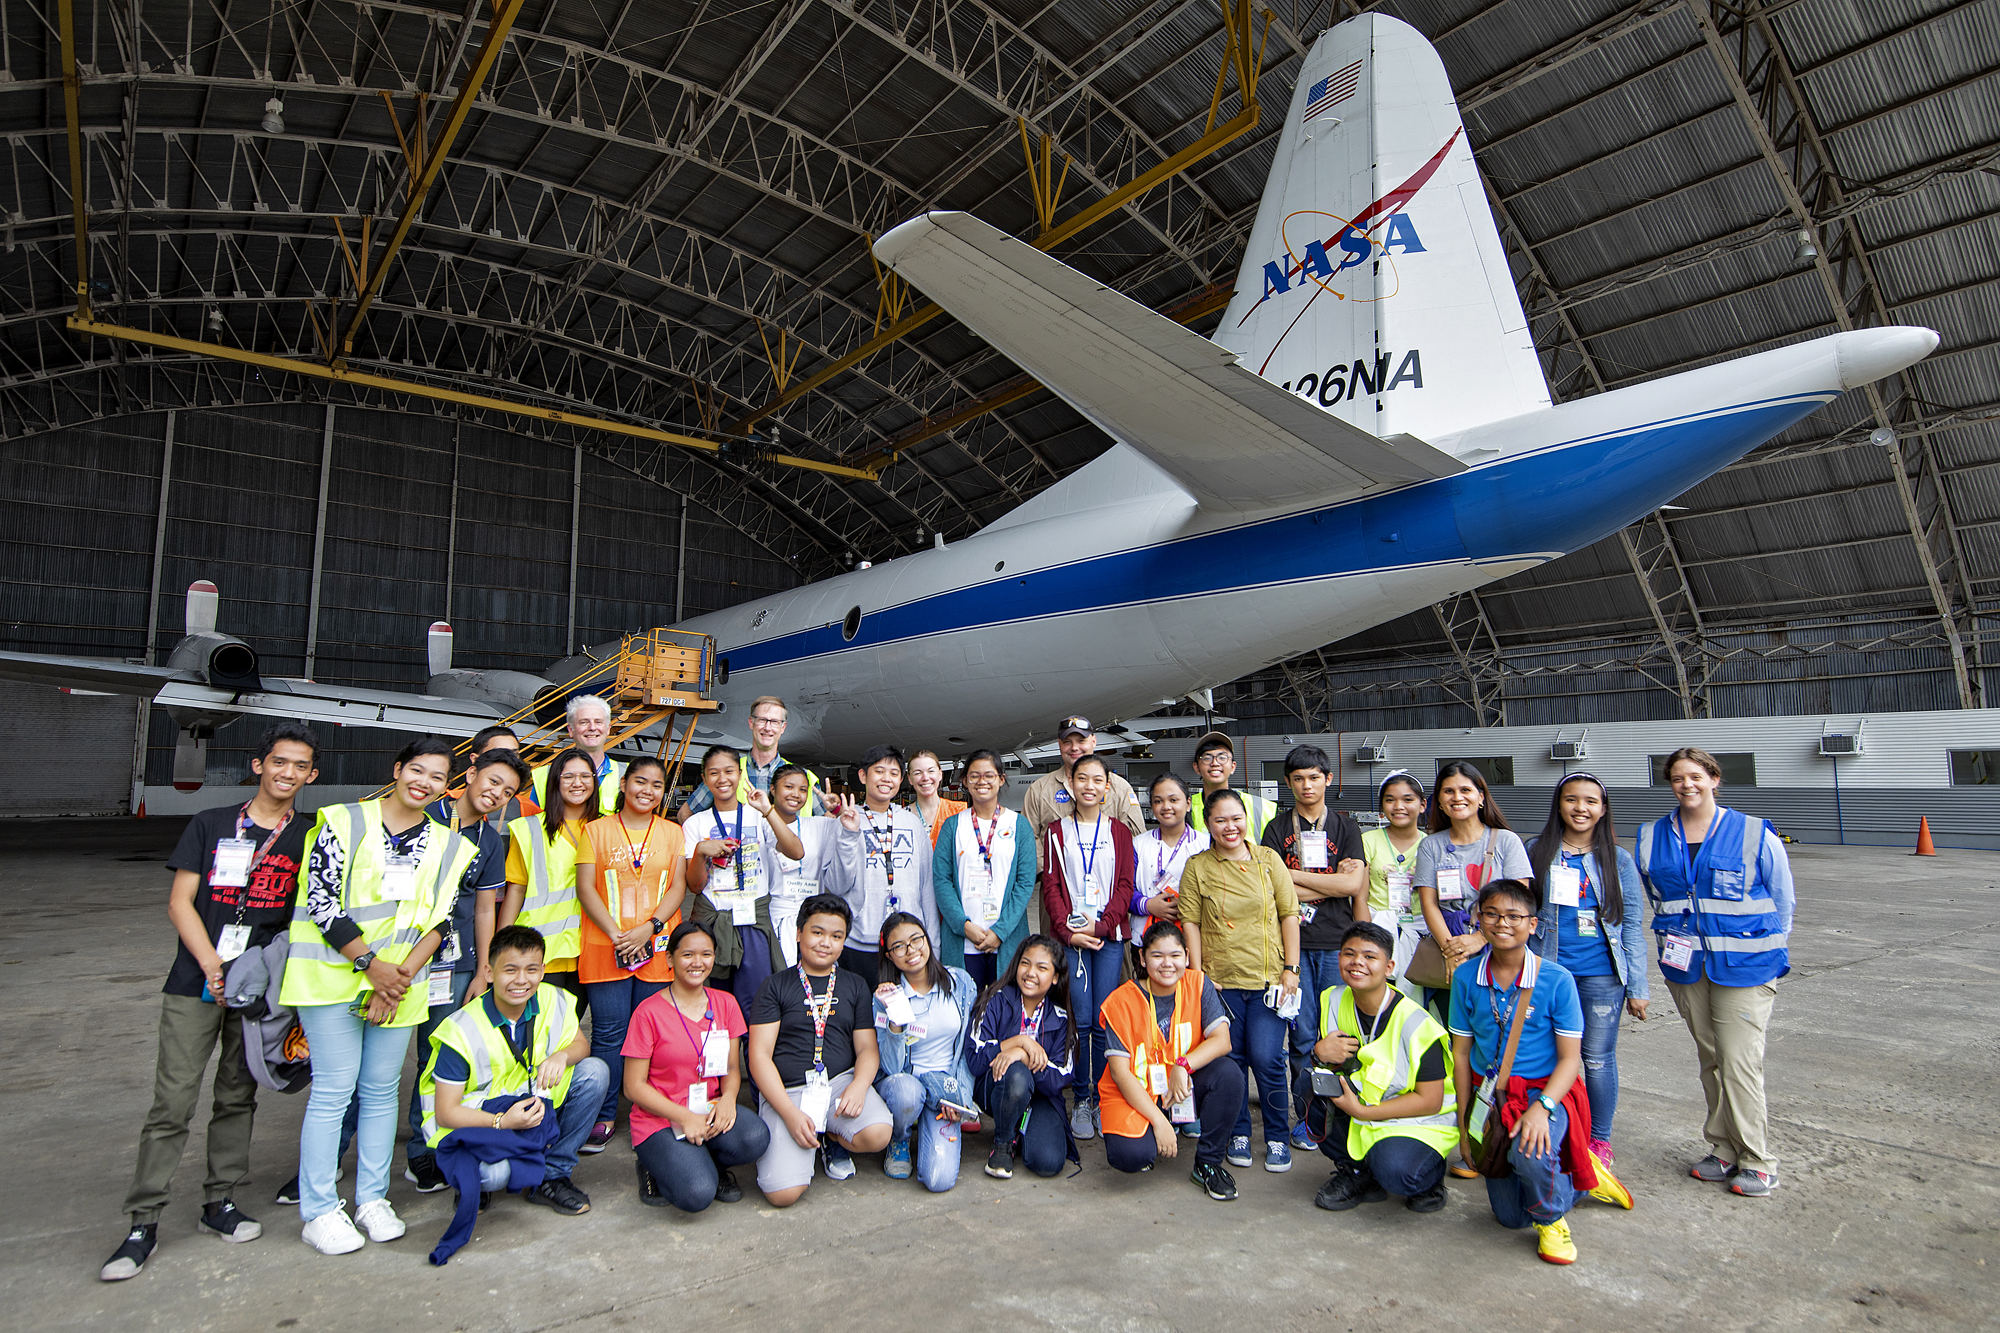 Students and teachers from Batasan Hills National High School and Bagong Silangan High School pose by the NASA P-3 aircraft after their tour of the NASA hangar at Clark International Airport, Philippines, on 14 September 2019.